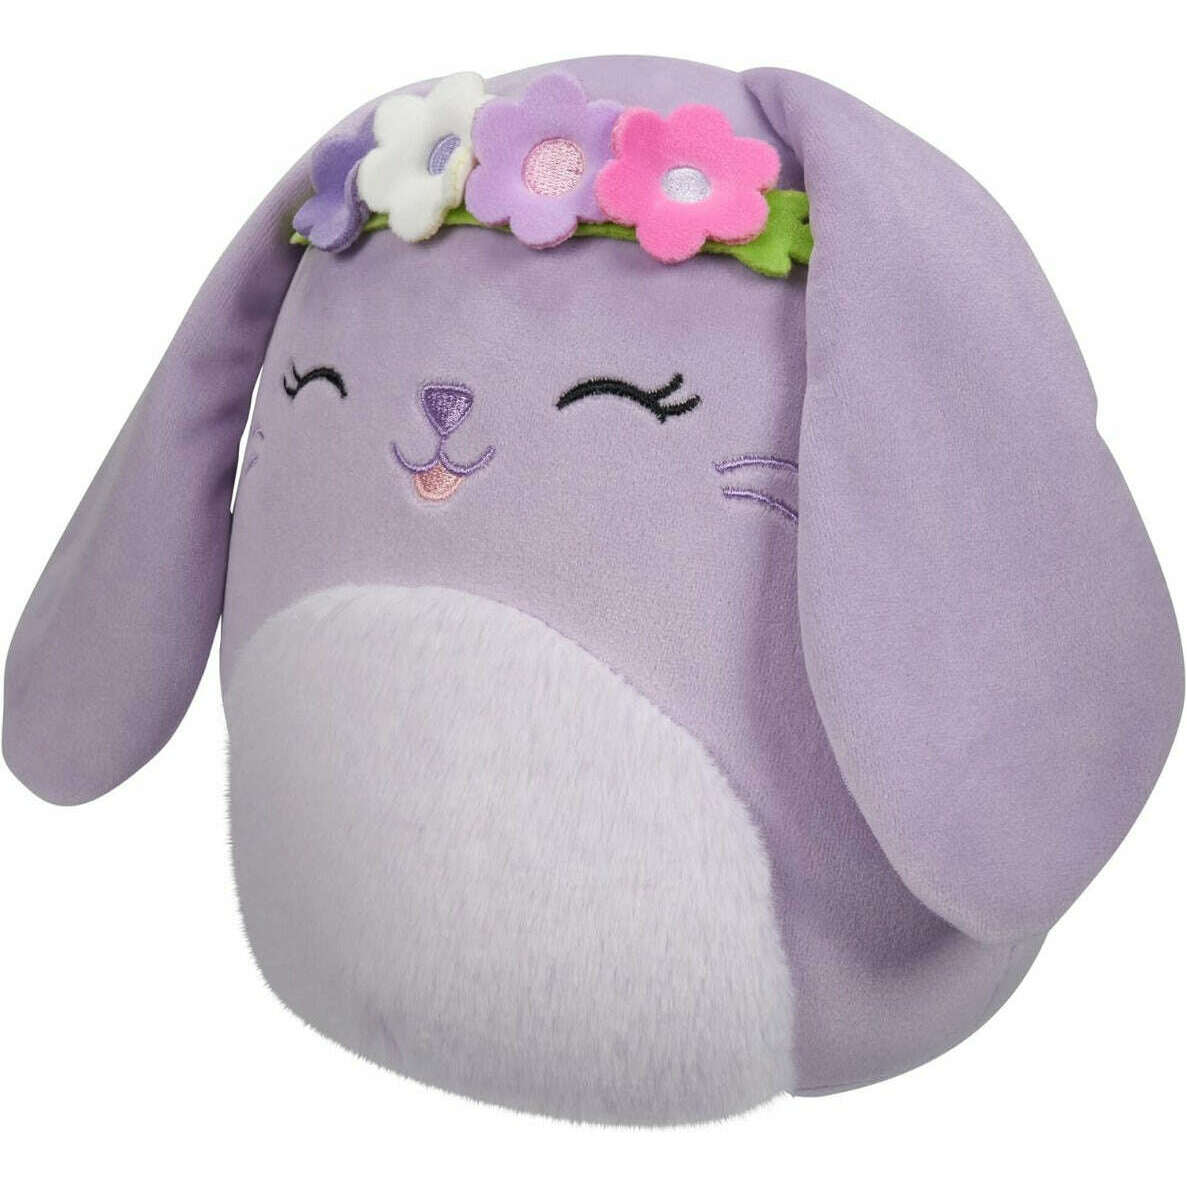 Toys N Tuck:Squishmallows Easter 7.5 Inch Plush - Bubbles The Bunny,Squishmallows